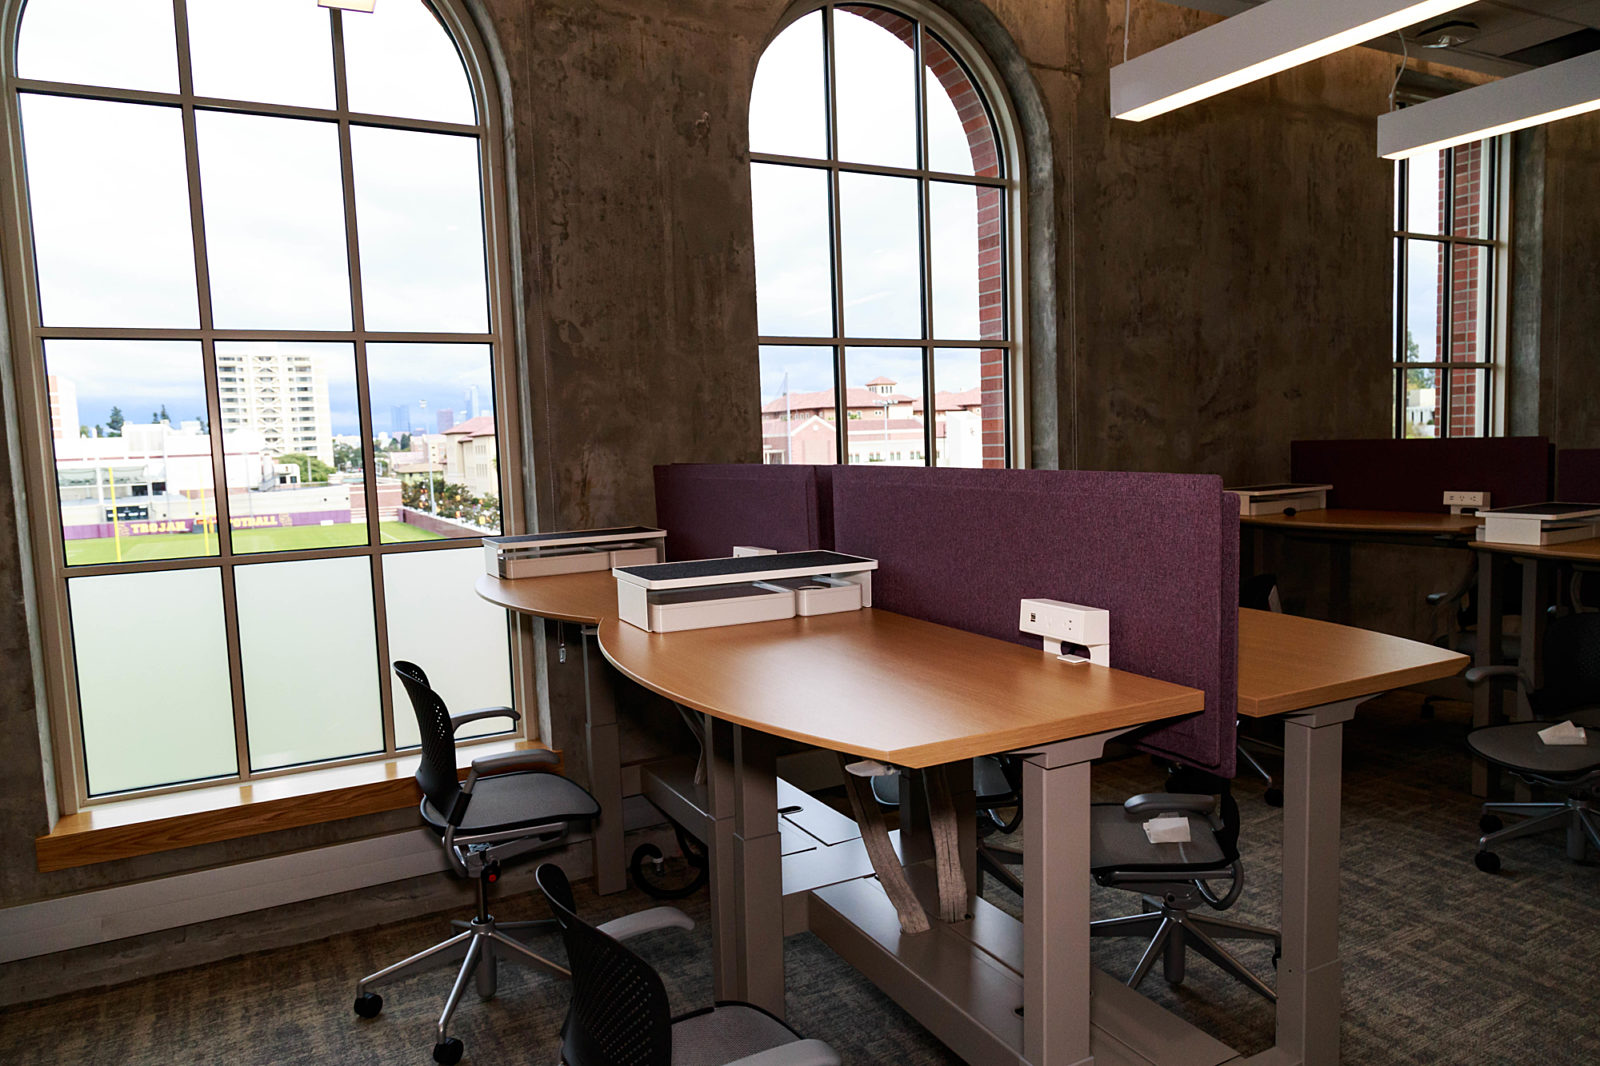 A huge workplace with several wooden desks and executive chairs. French windows with a magnificent view flank the desks.